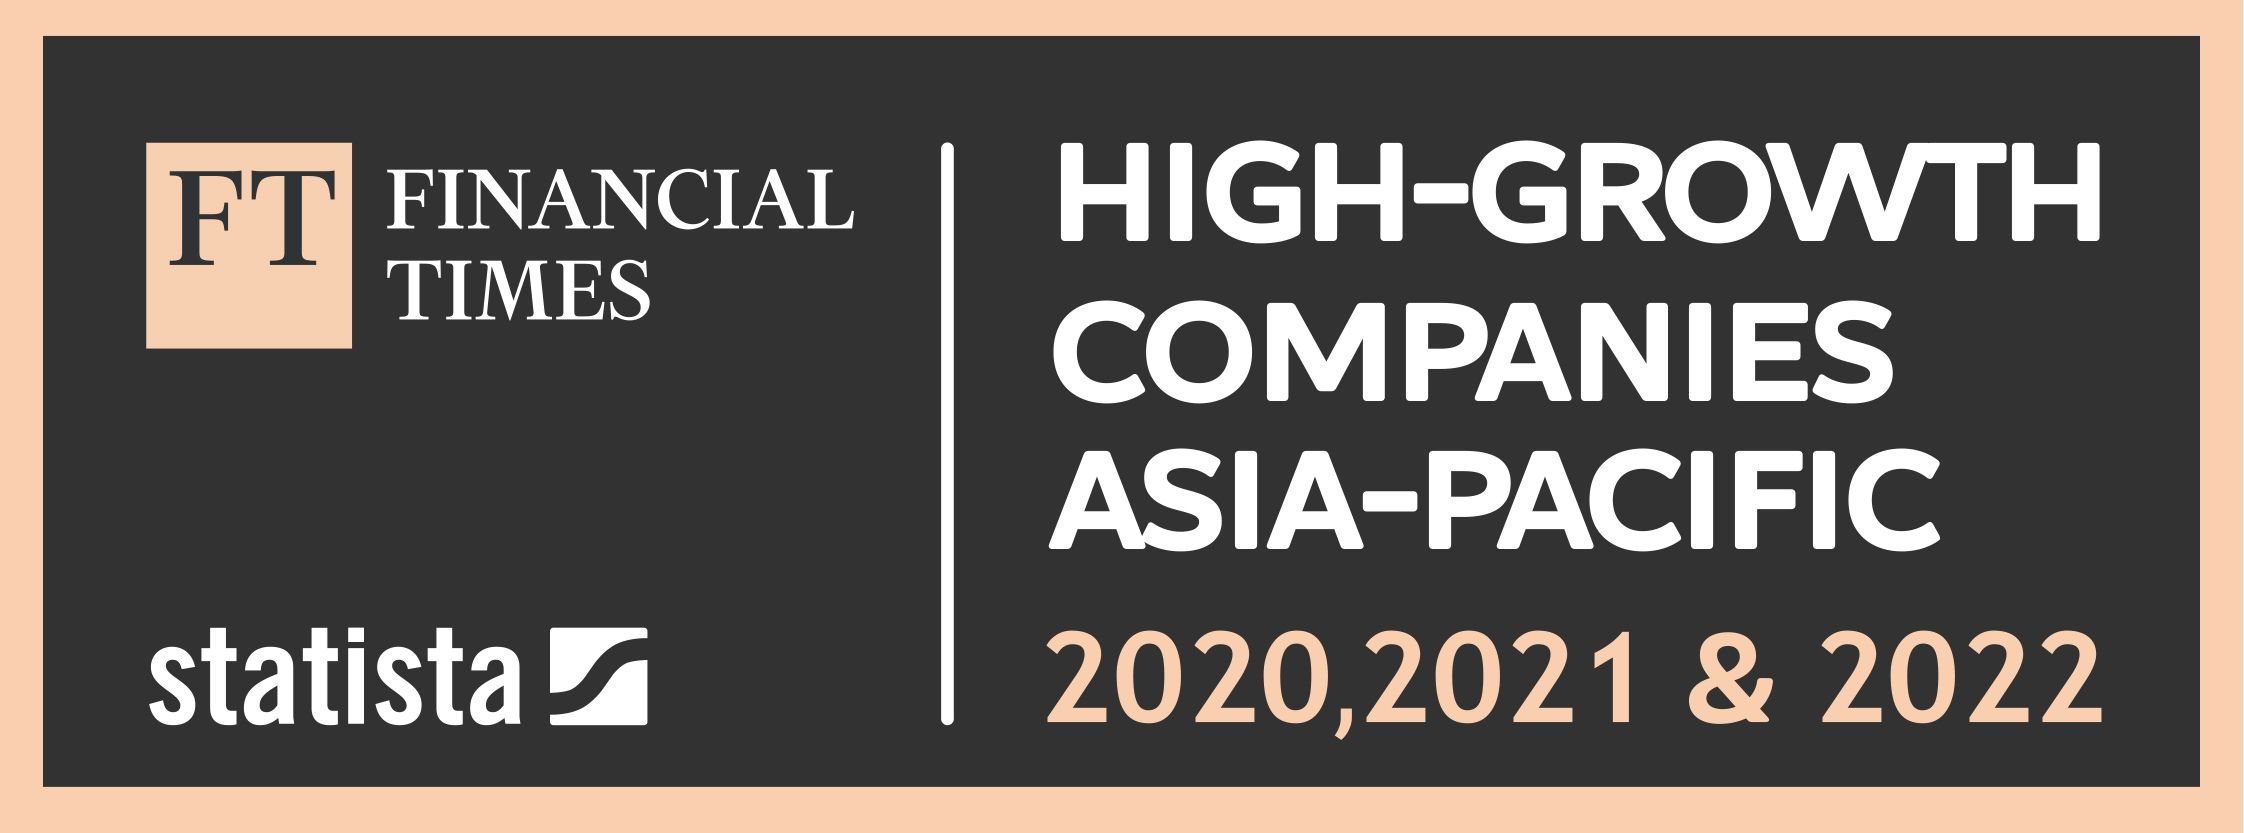 FT High-growth companies Asia-Pacific 2022